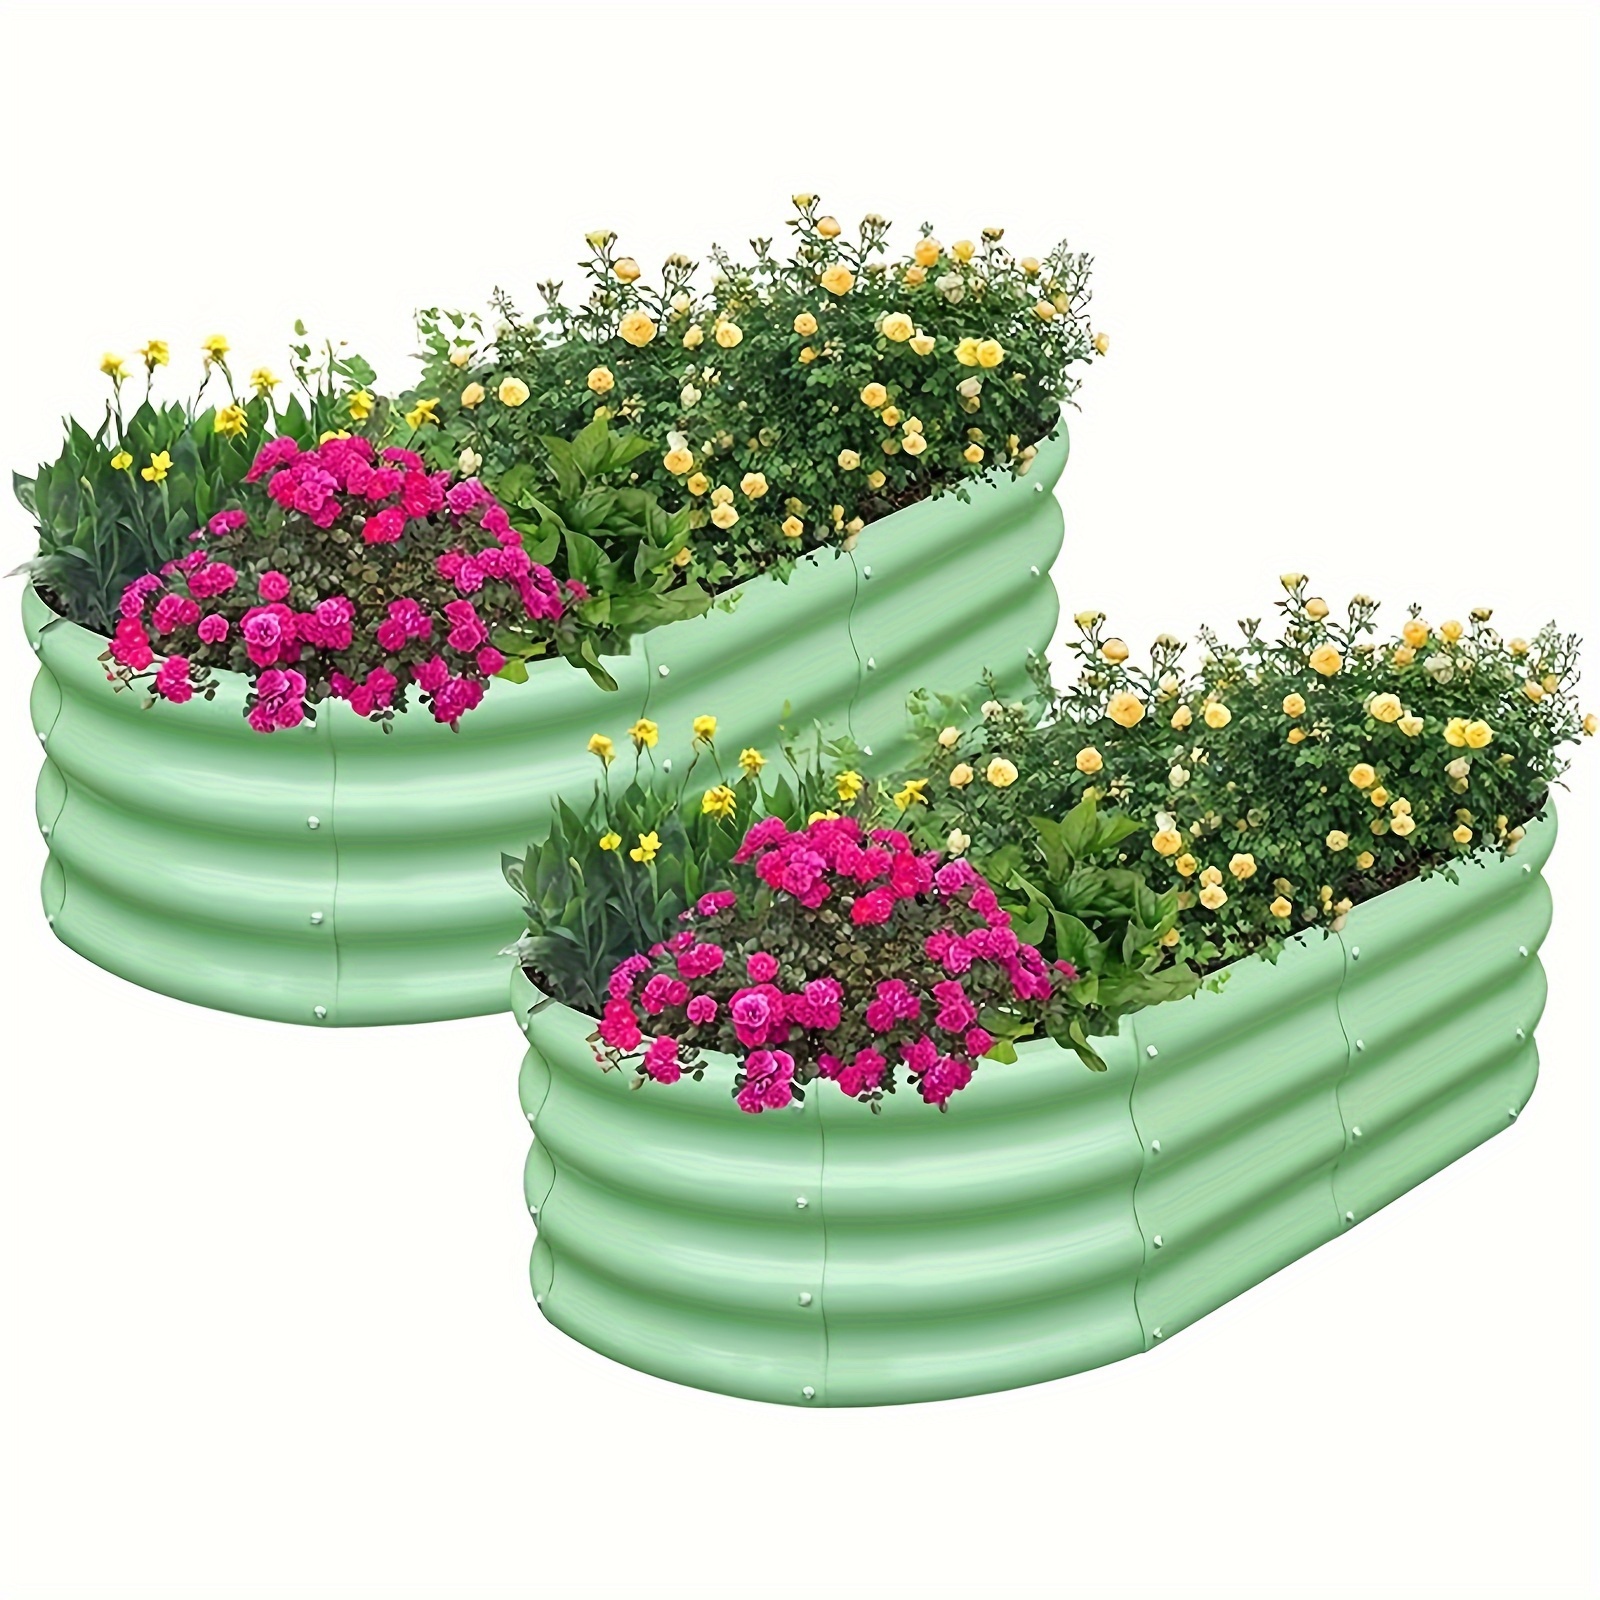 

Raised Garden Bed Outdoor, 2 Pcs 4x2x1ft Oval Metal Planter Box For Planting Plants Vegetables, Green